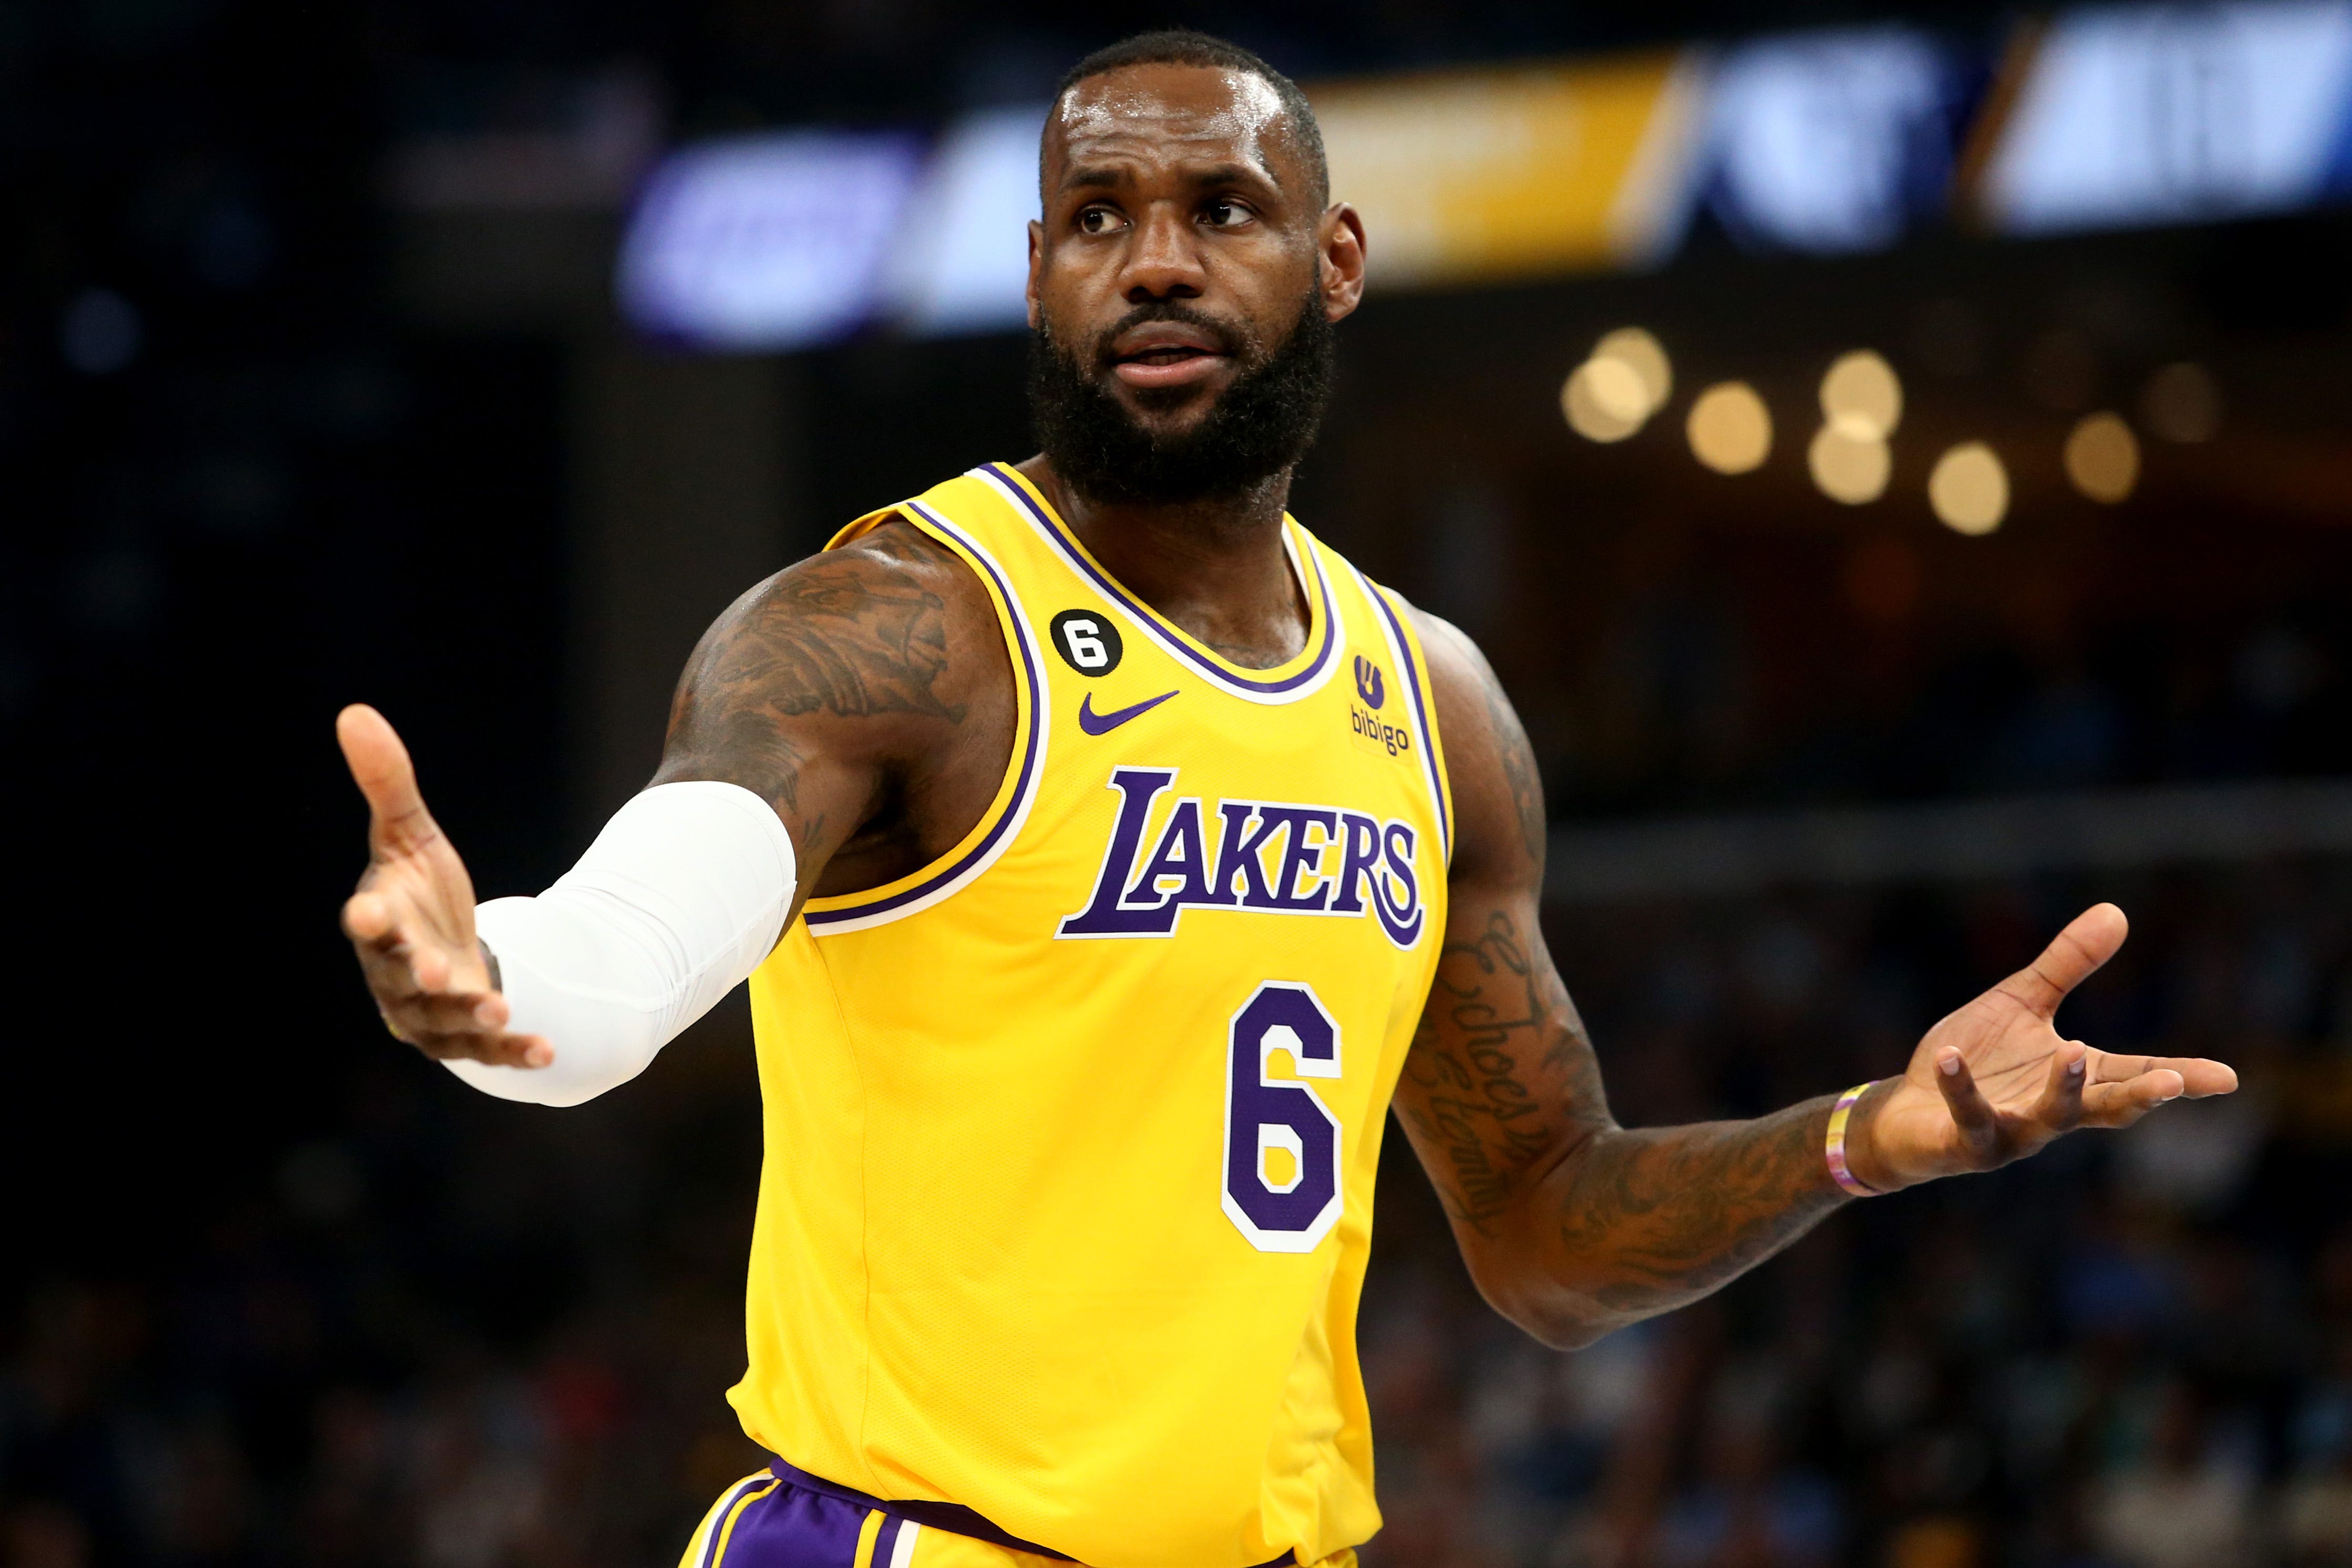 Lakers' LeBron James does not receive any votes for NBA MVP